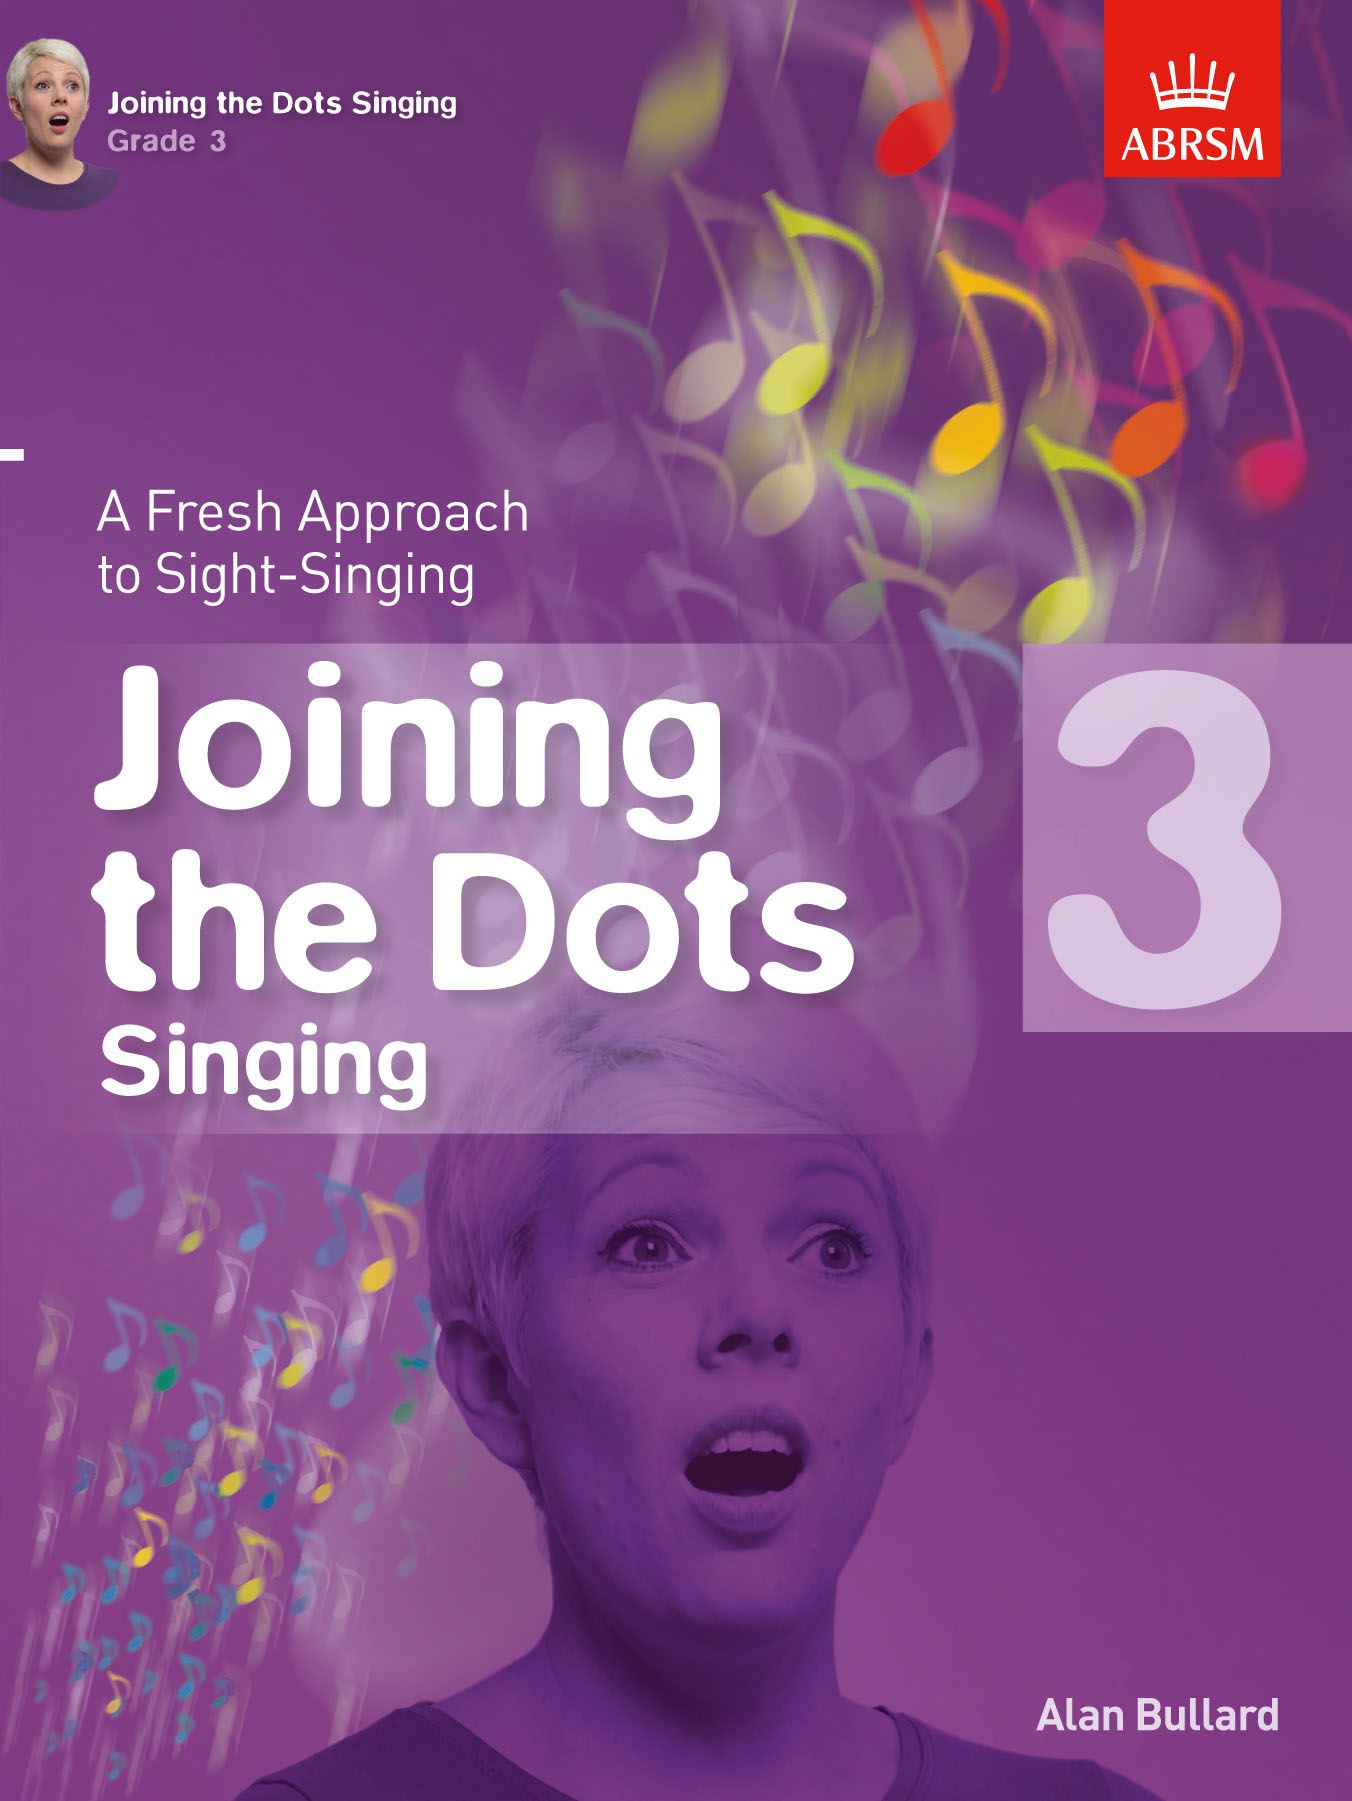 Joining the Dots for Singing G3